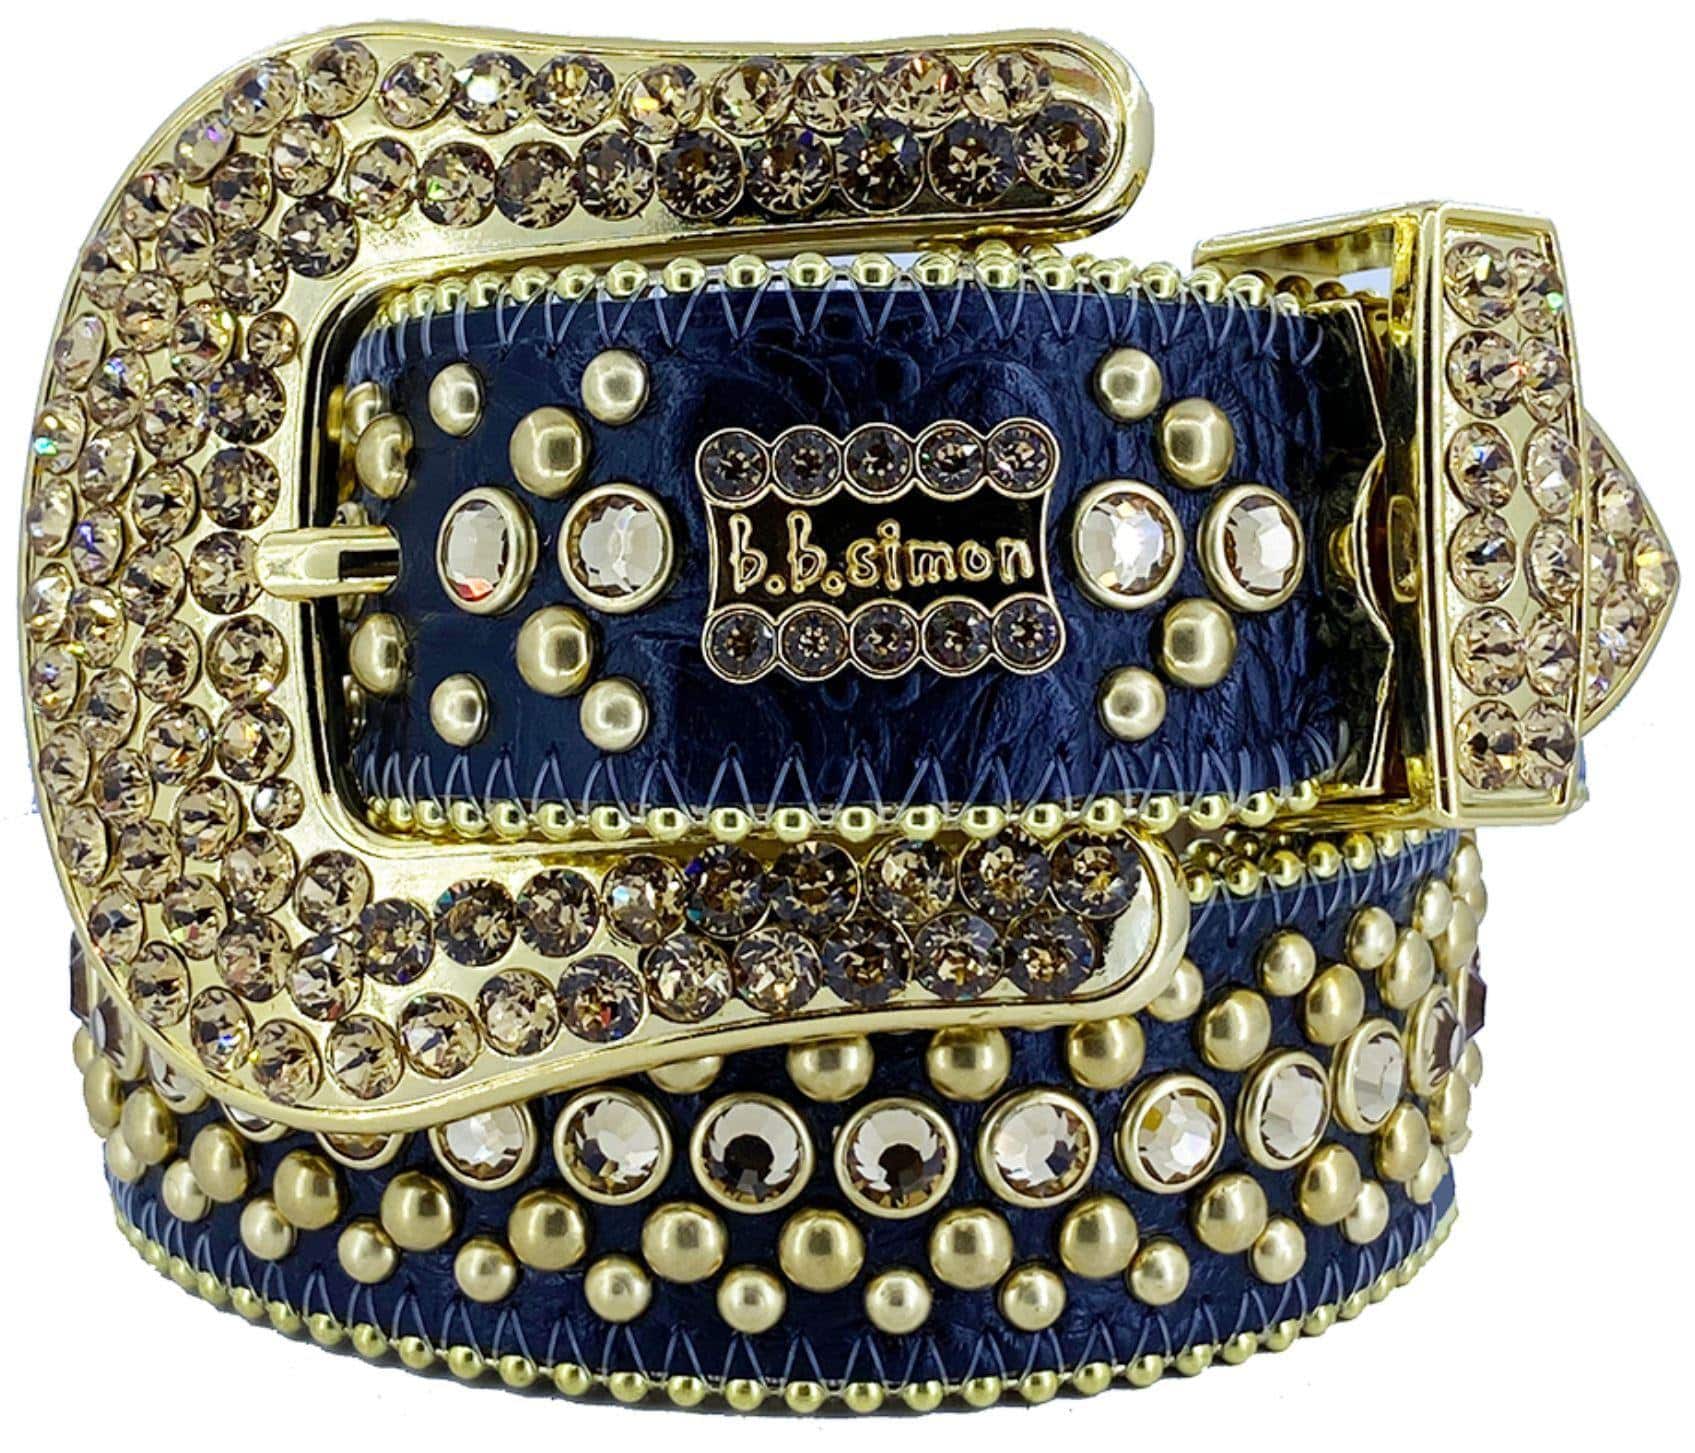 Bb Simon Kish Leather Belt with Crystals